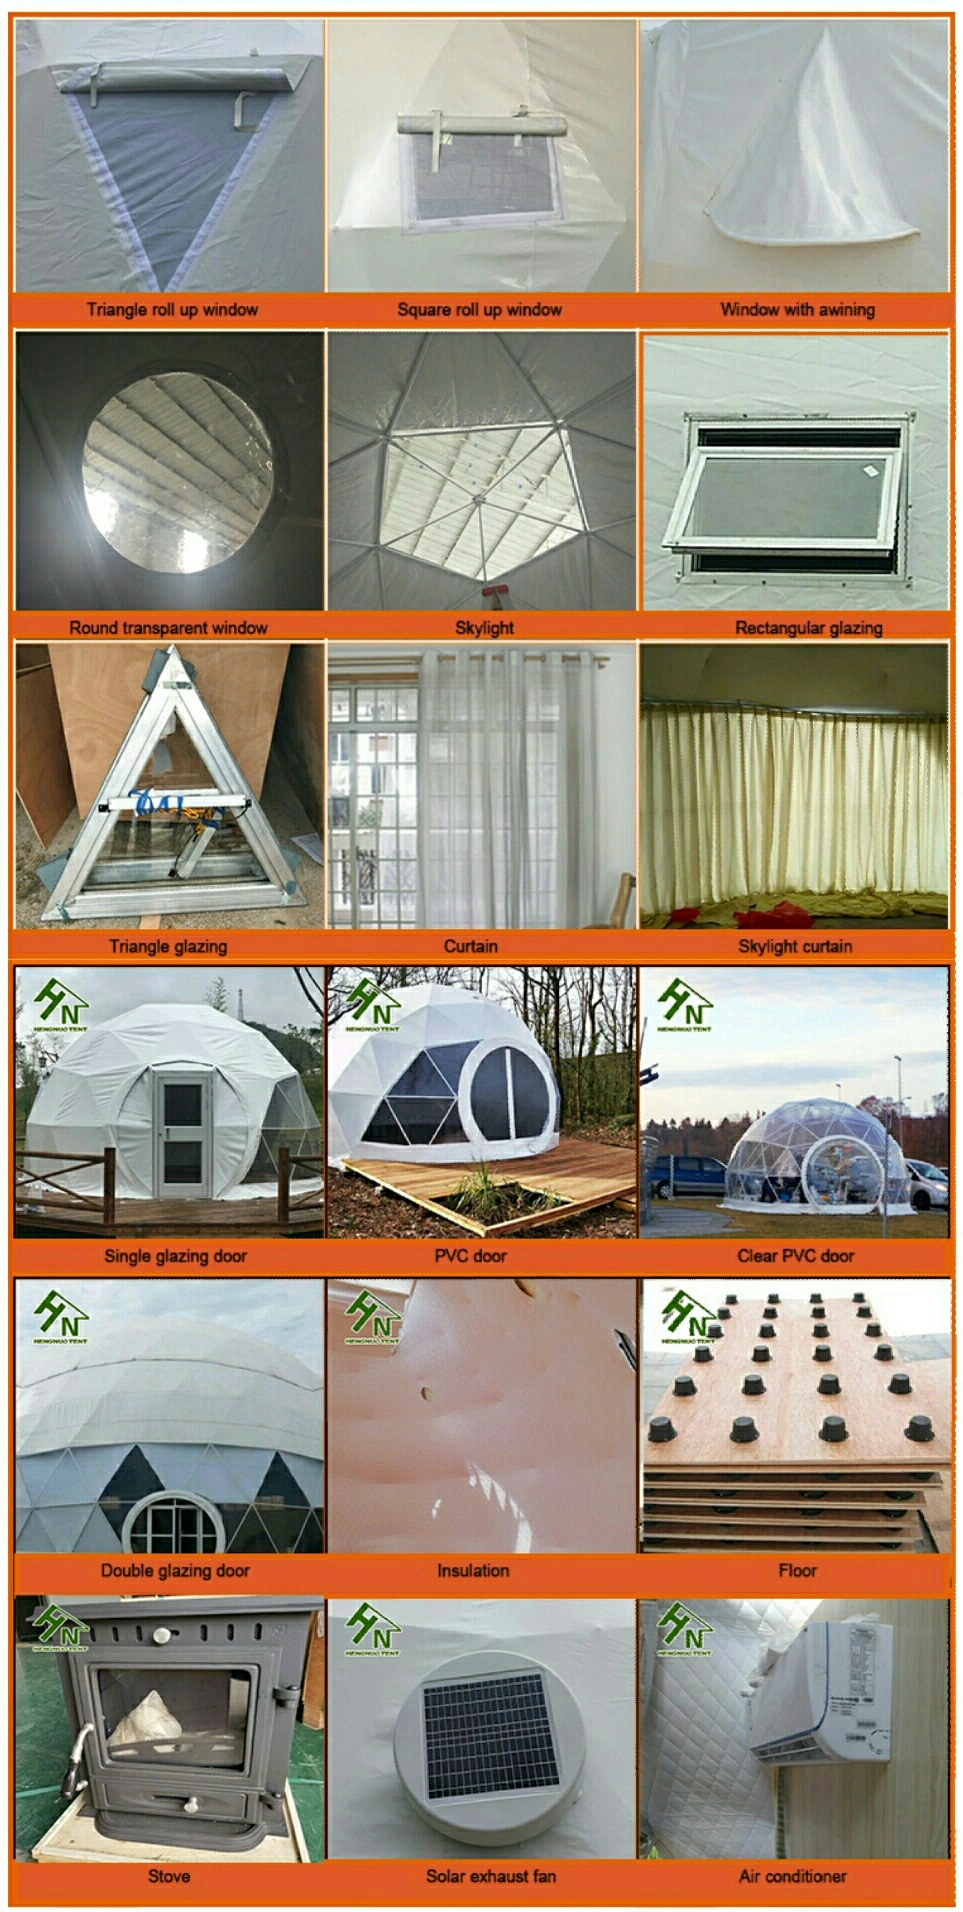 8m Steel Frame Permanent Winter Cold Weather Snow Dome House